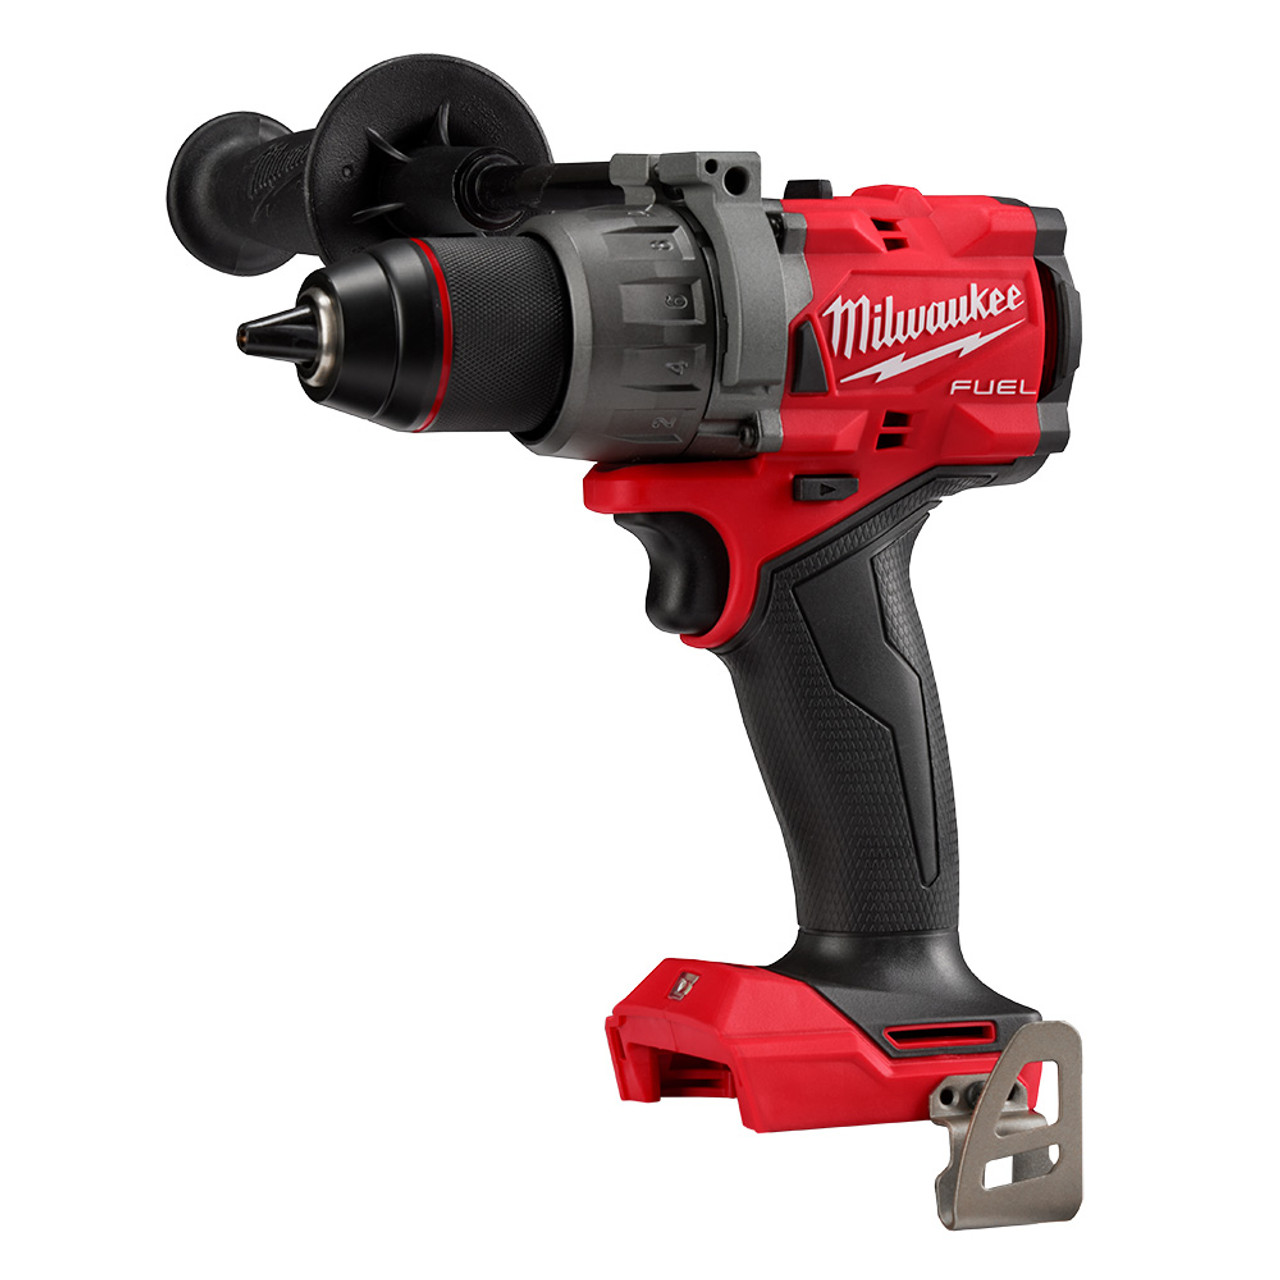 Milwaukee MIL-2904-20 GEN4 M18 FUEL 1/2" Hammer Drill/Driver (Tool Only)  Atlas-Machinery